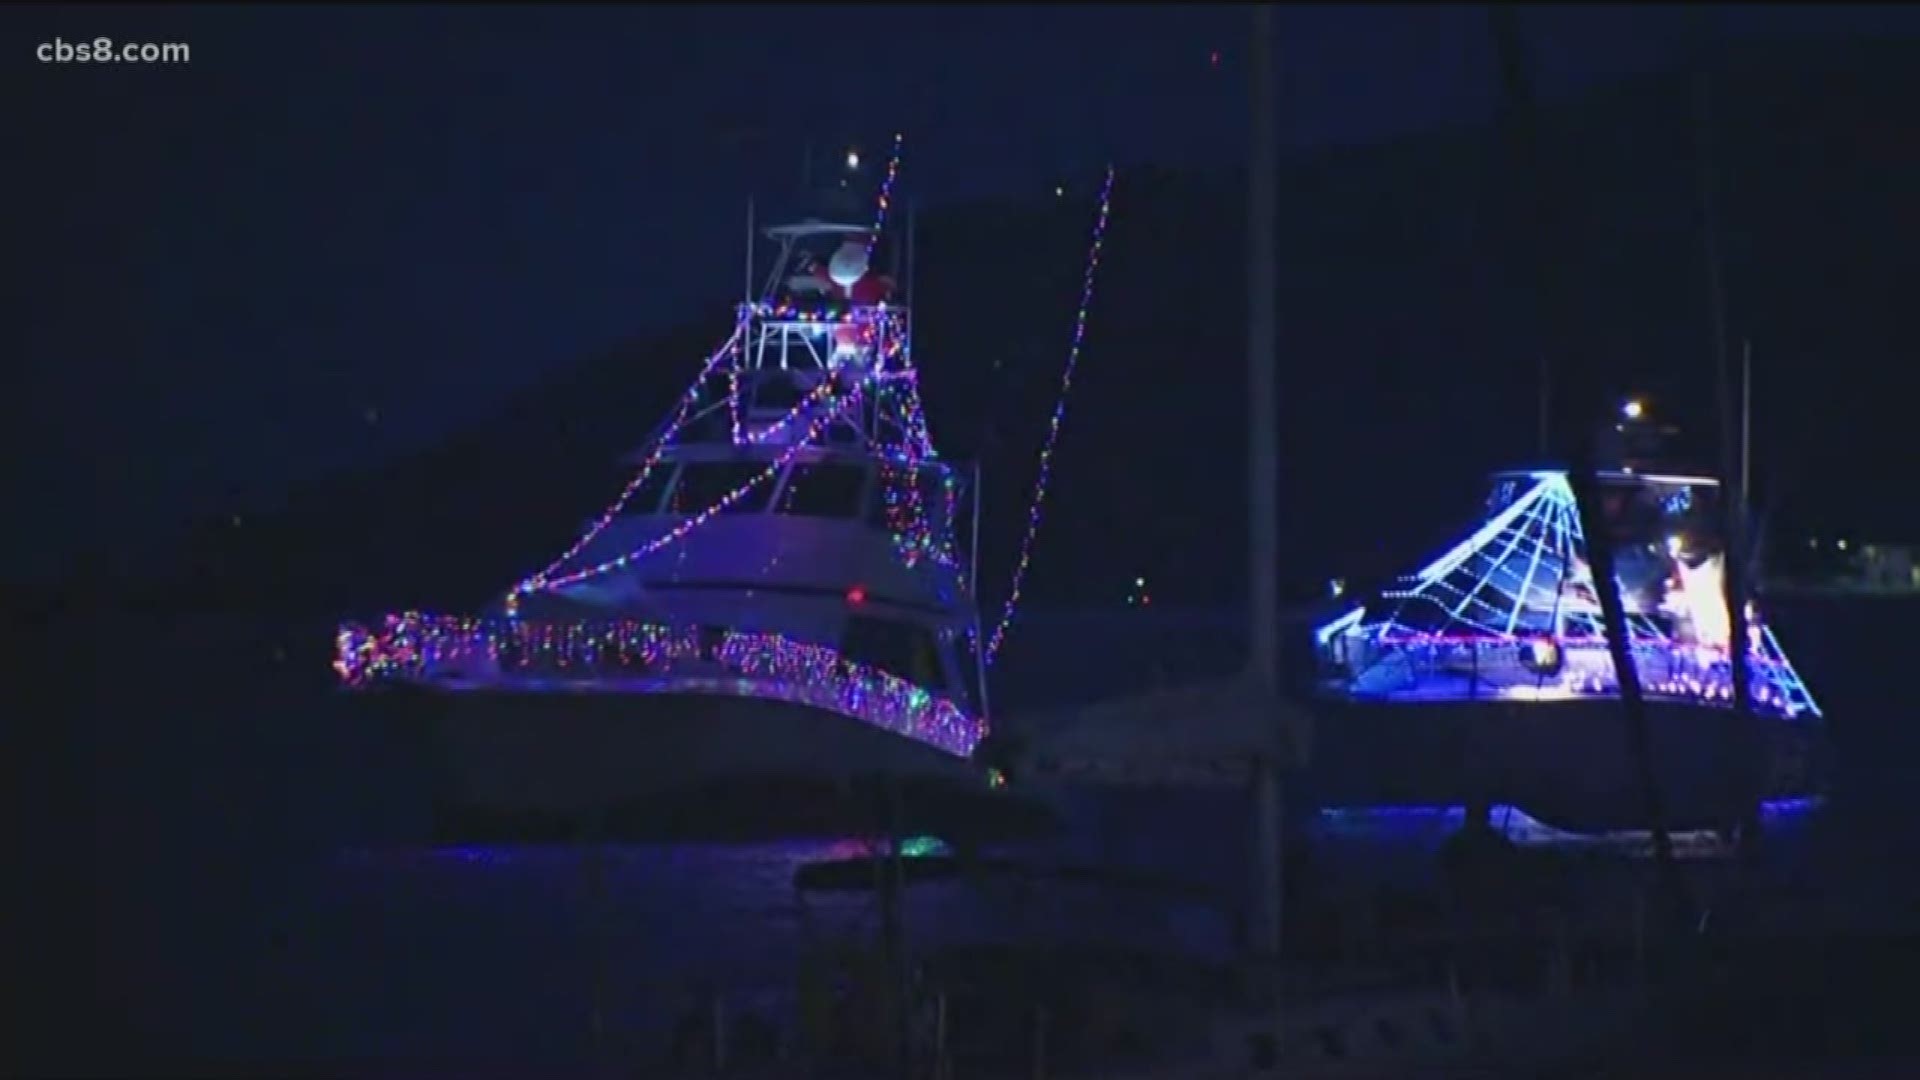 A San Diego holiday season tradition hit local waters Sunday, Dec. 8 as the Port of San Diego hosted the 48th annual San Diego Bay Parade of Lights.